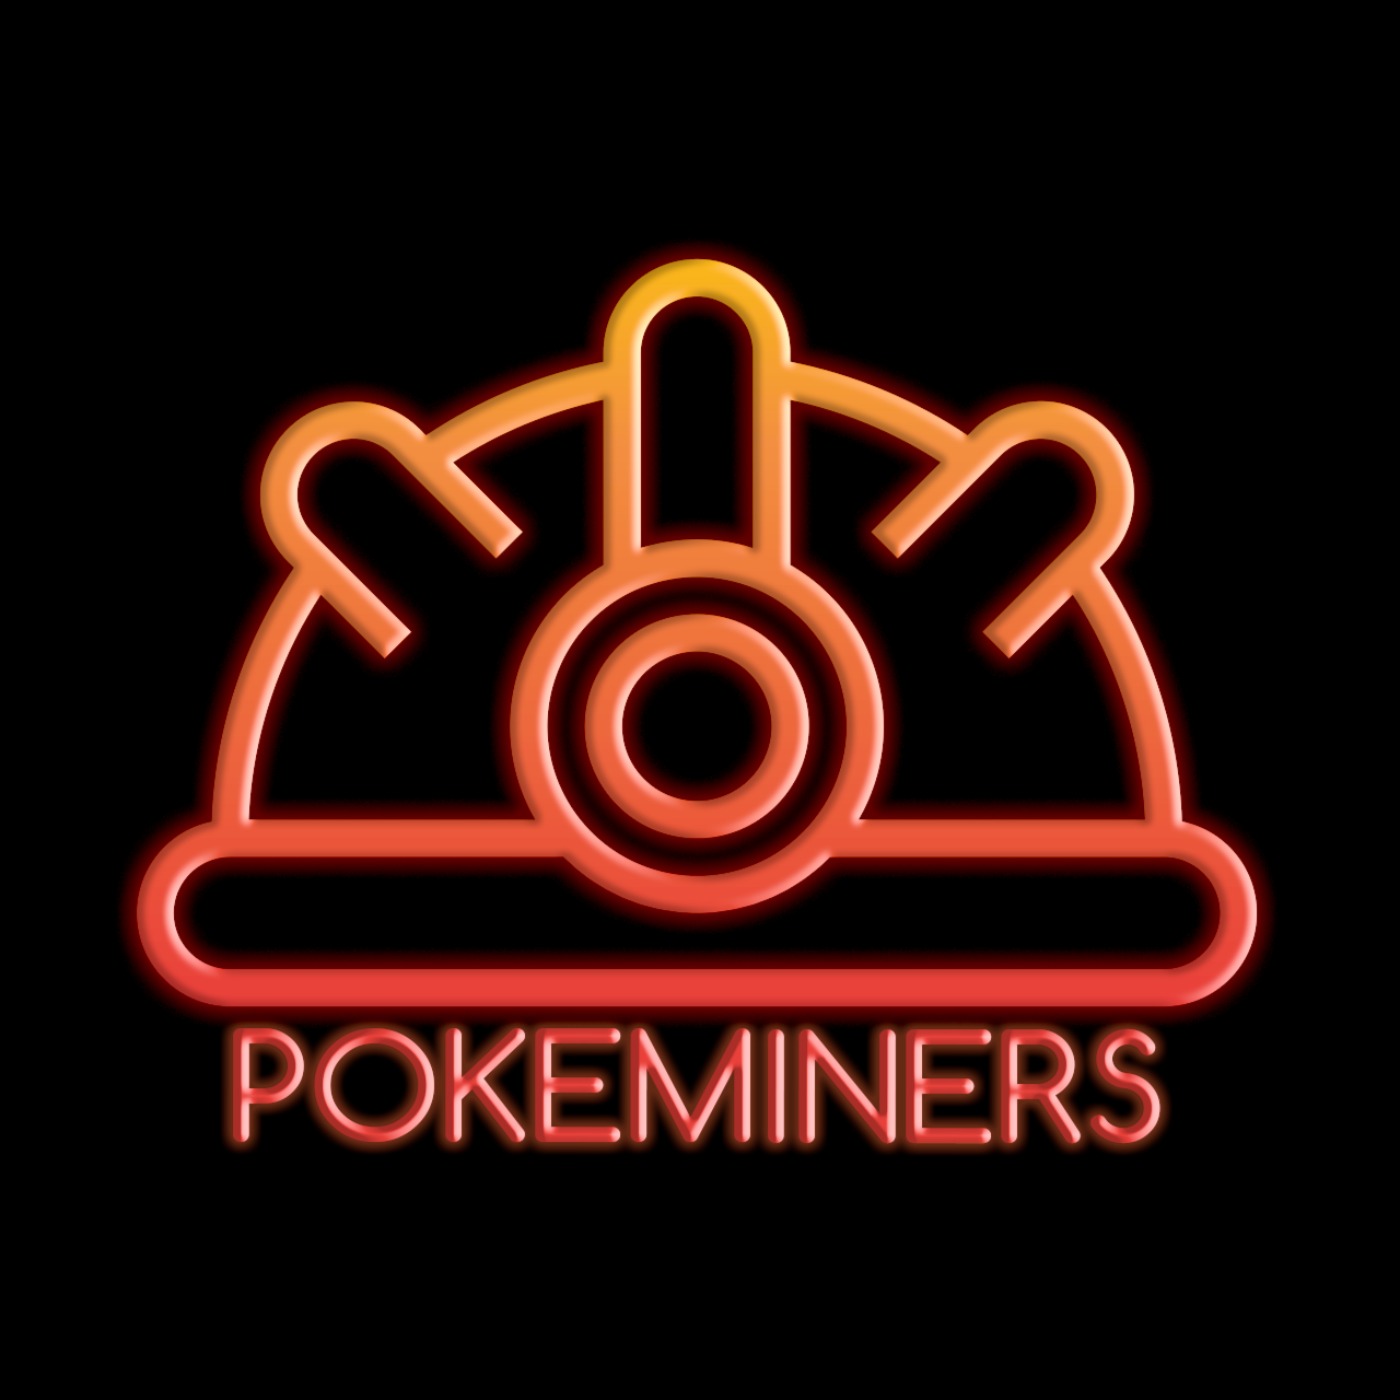 Episode 1 - PokeMiners umm launch a Podcast